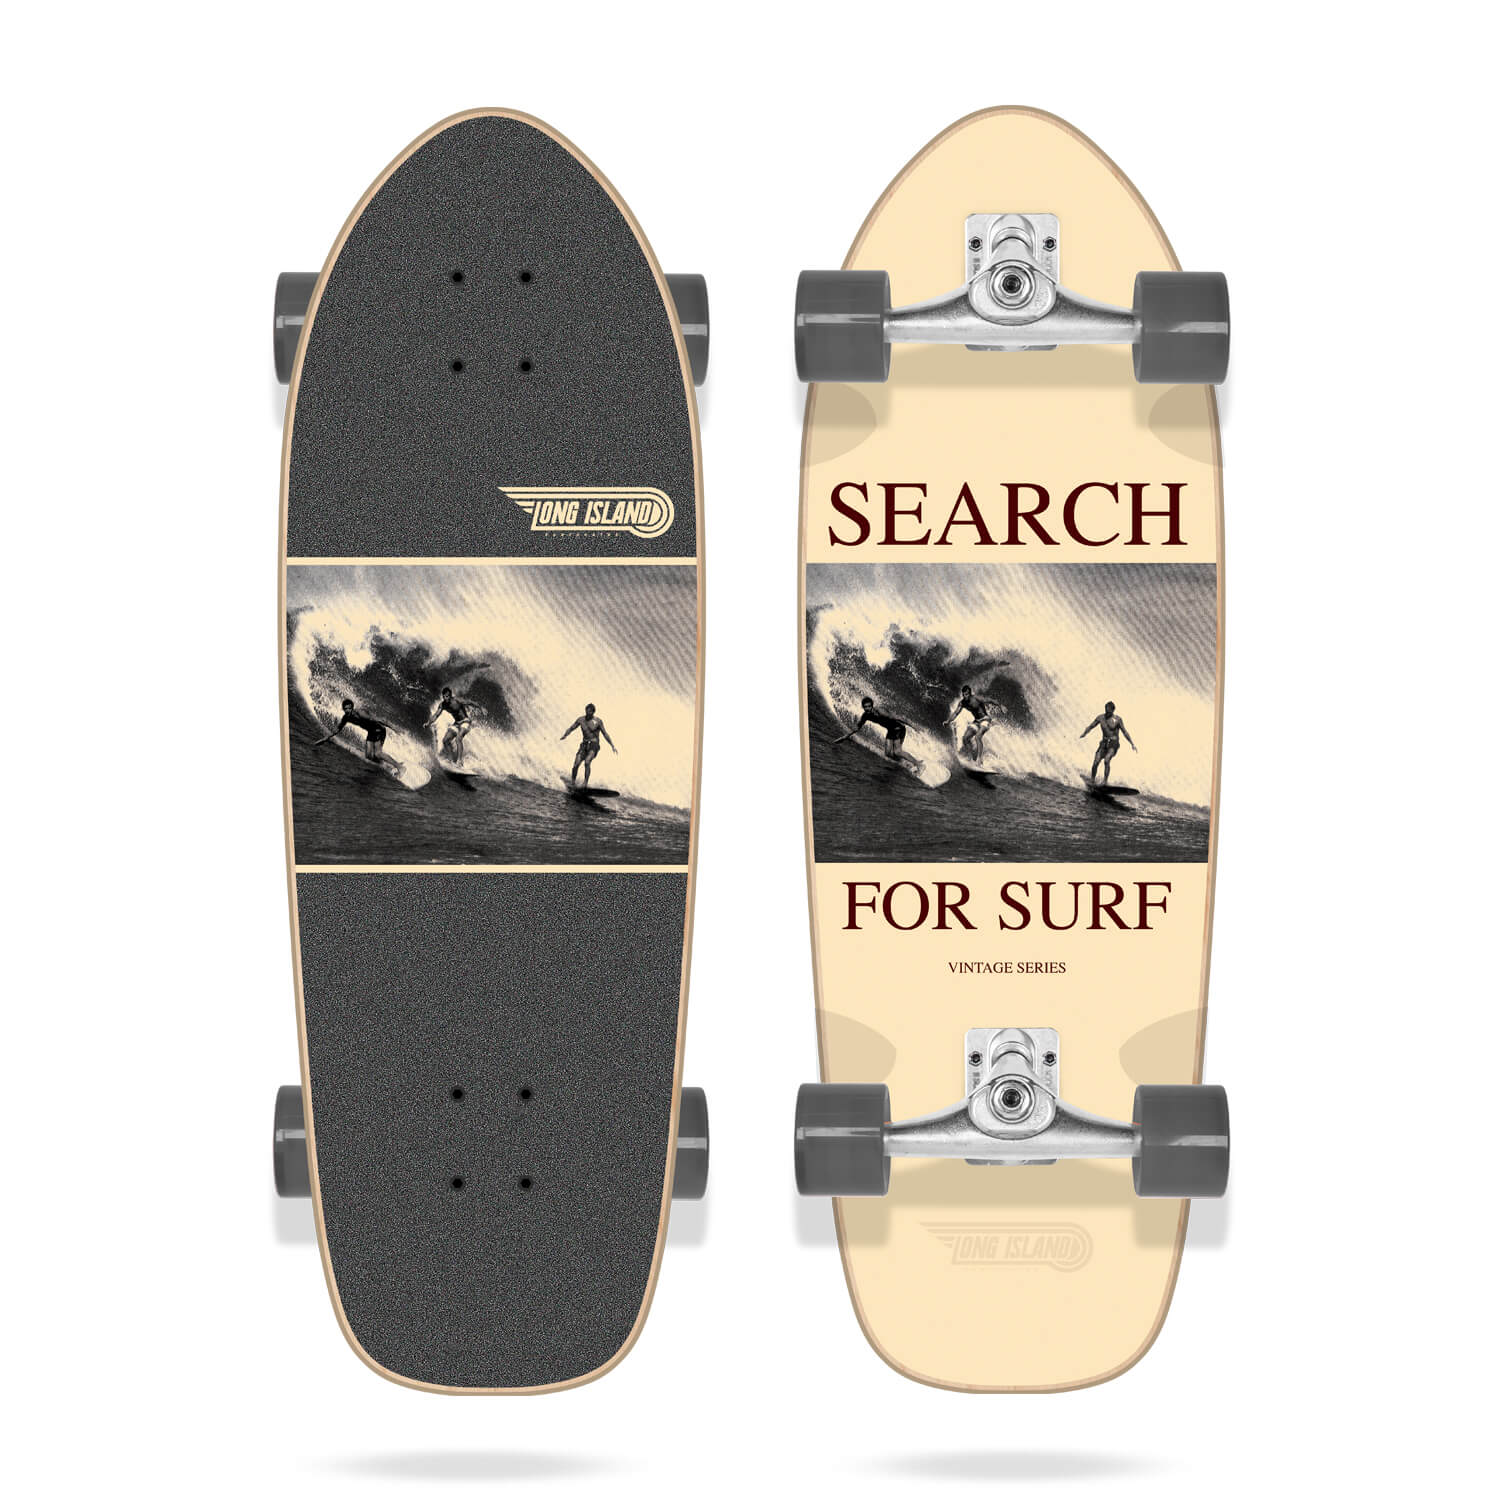 Long Island Search 29.5" surfskate